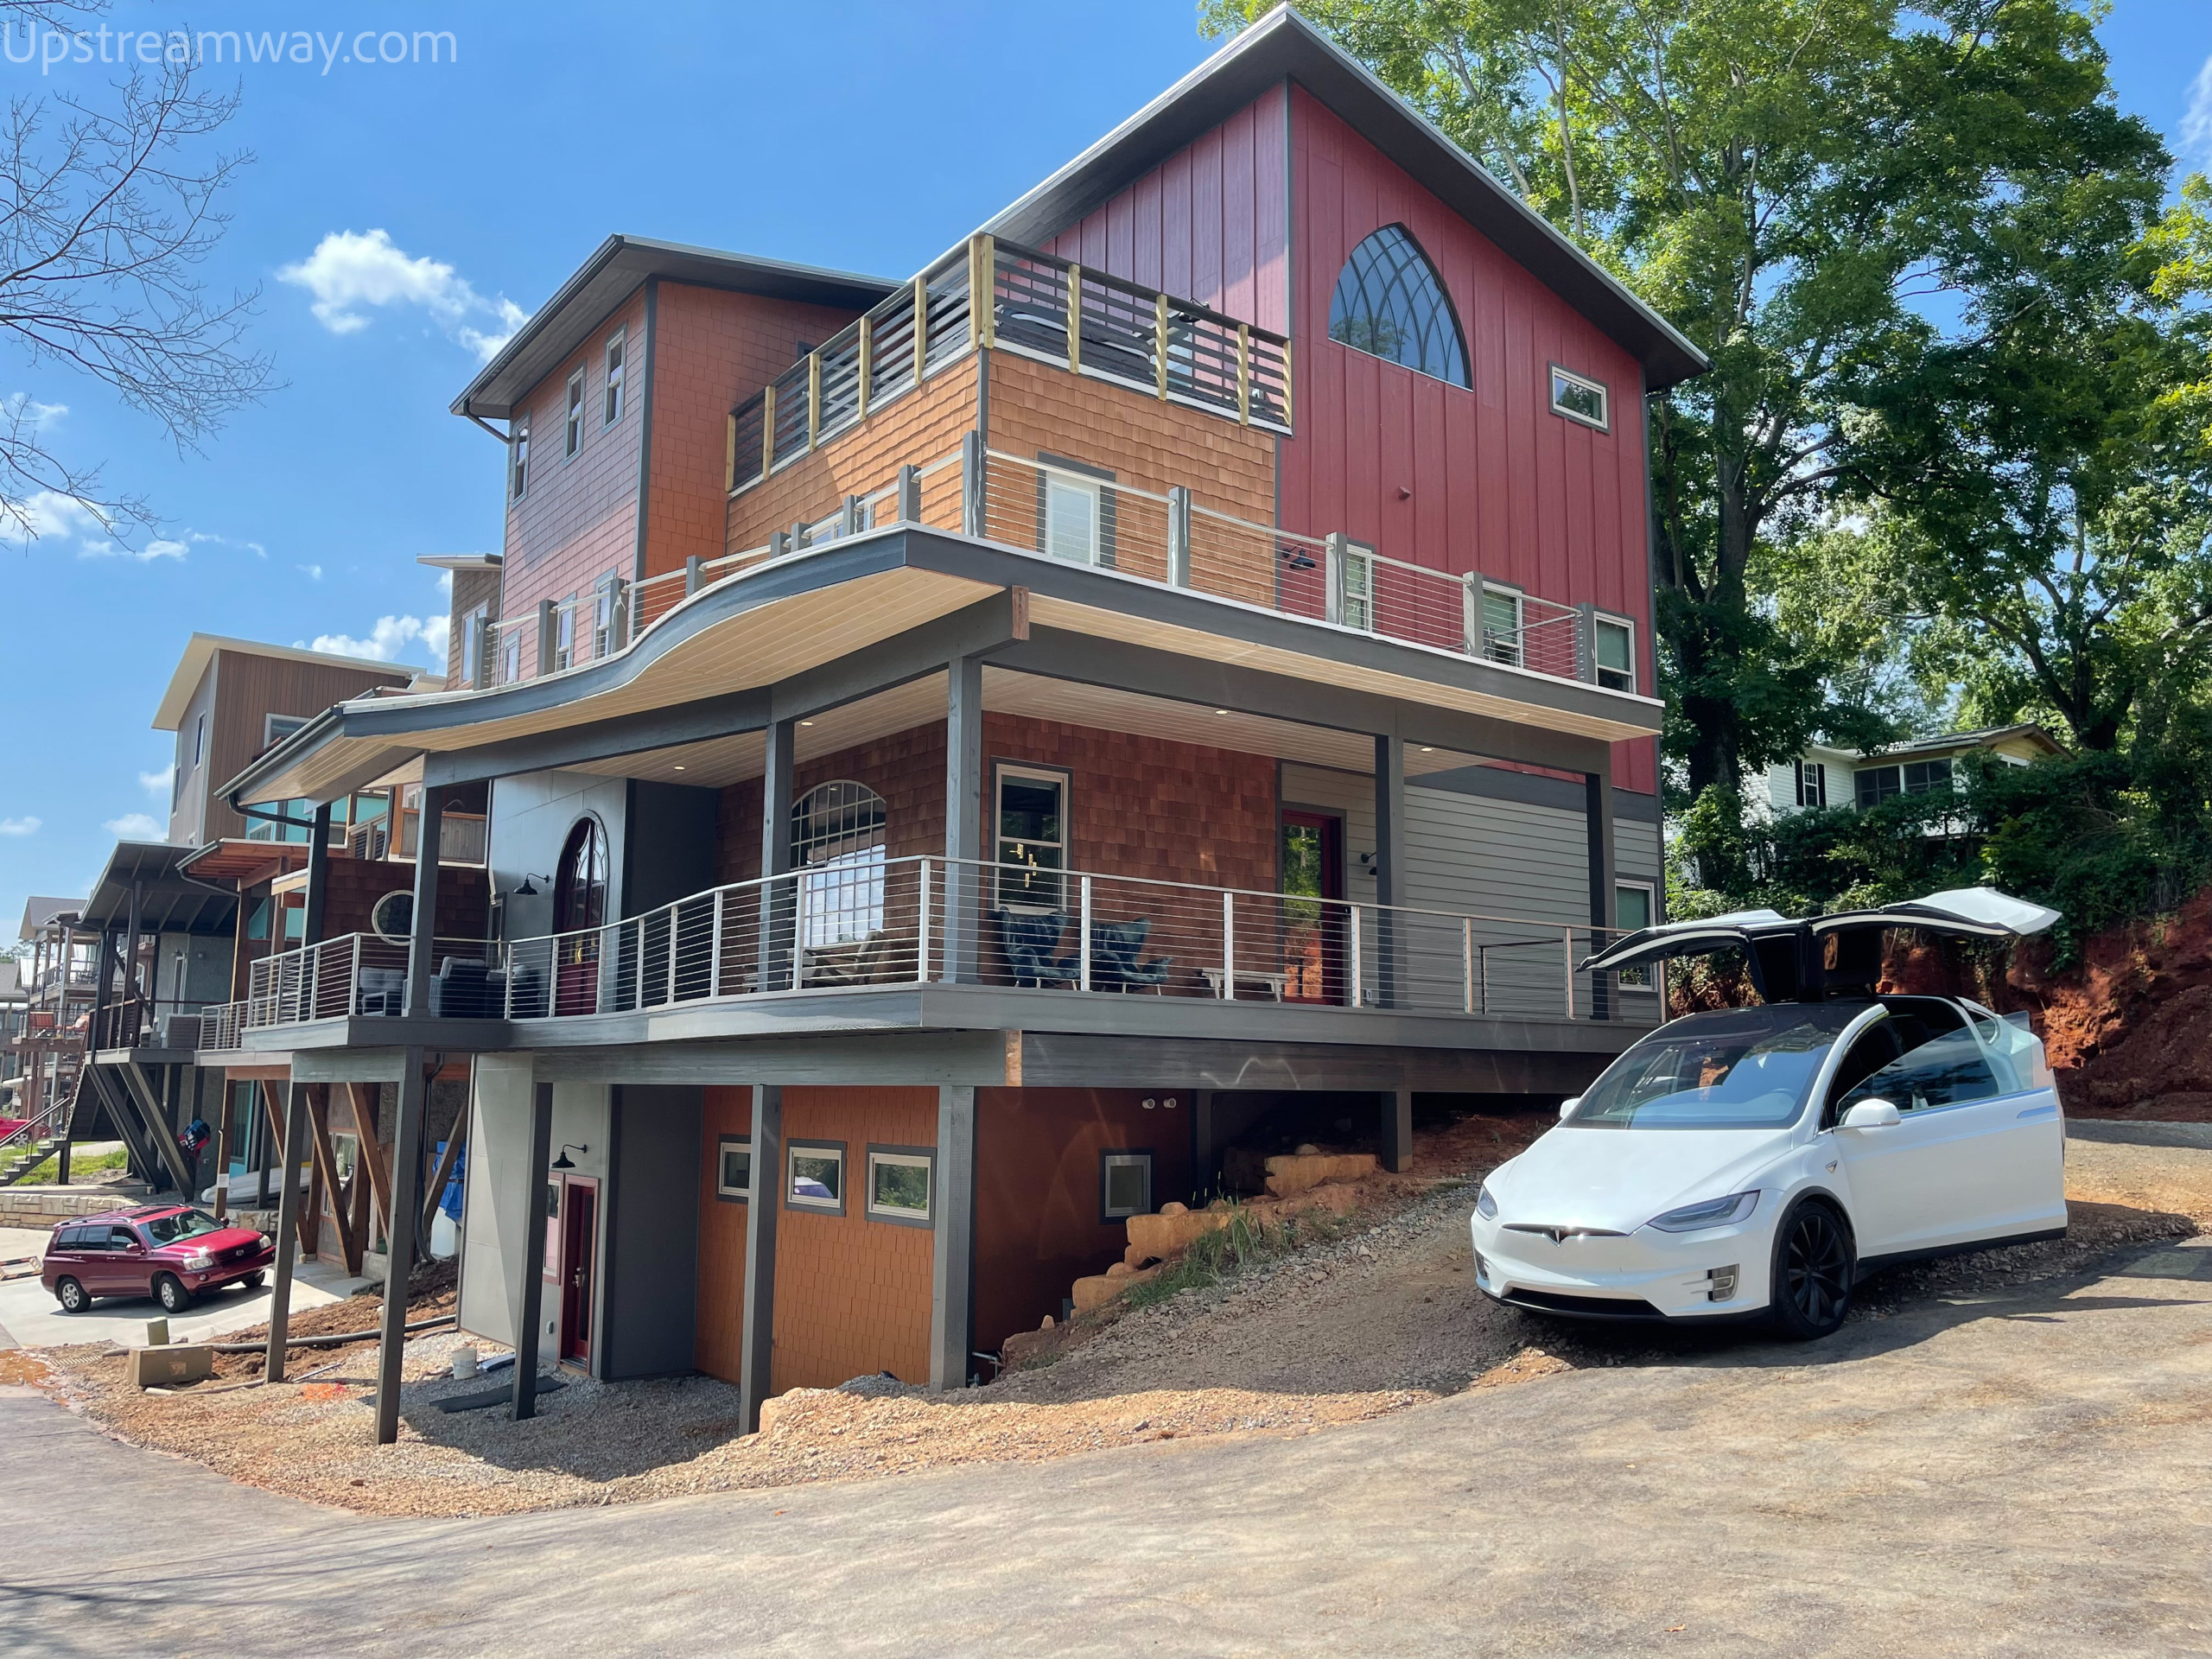 View Asheville Luxury Vacation Rental Upstream Bachelor Sanctuary